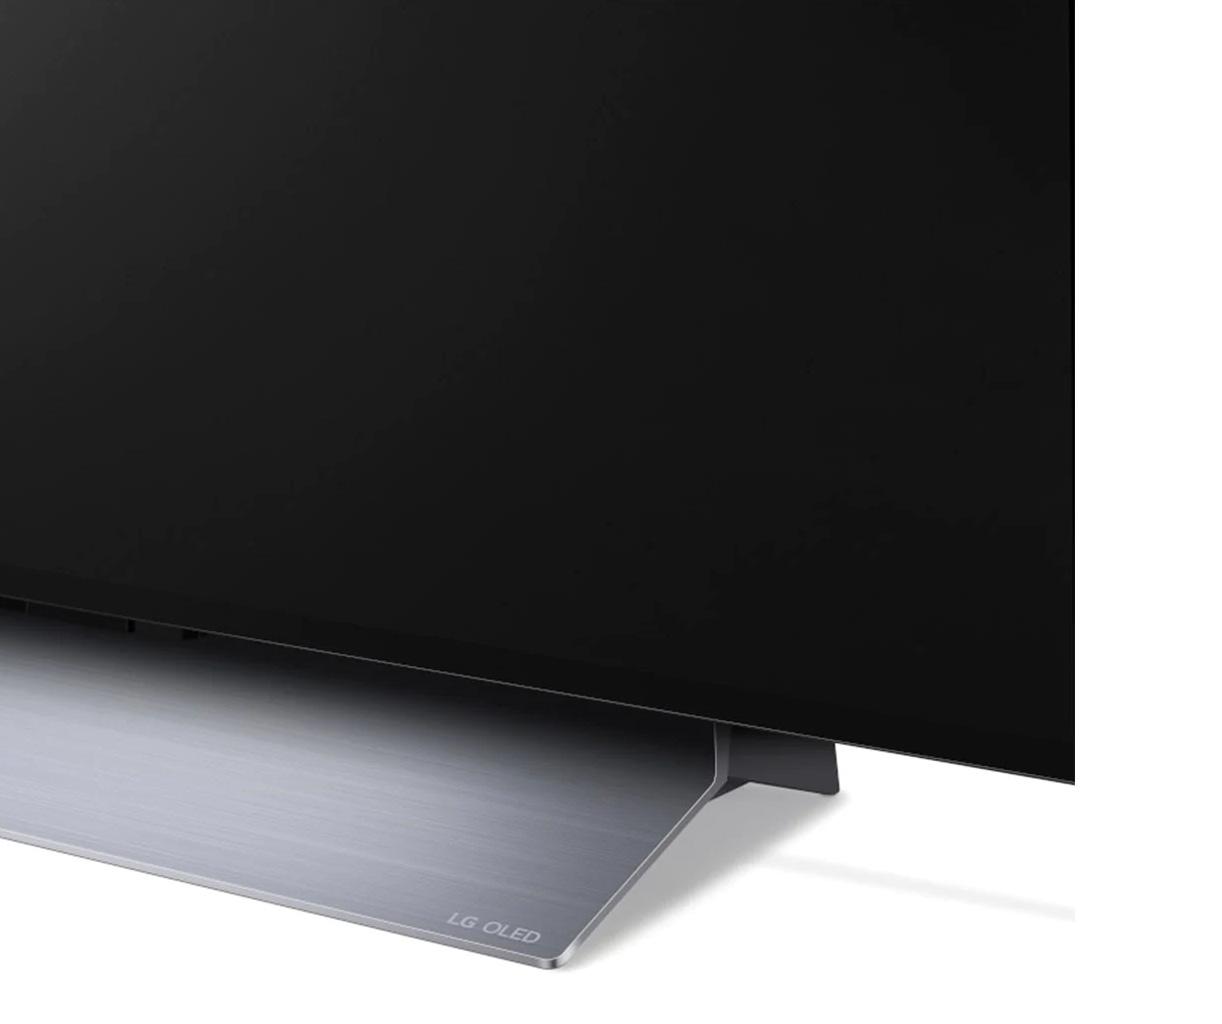 LG's 65-inch C2 ups the gaming ante again in several ways, with new panel technology to elevate HDR image quality. ad2d2ac8 lg oled c2 cover3